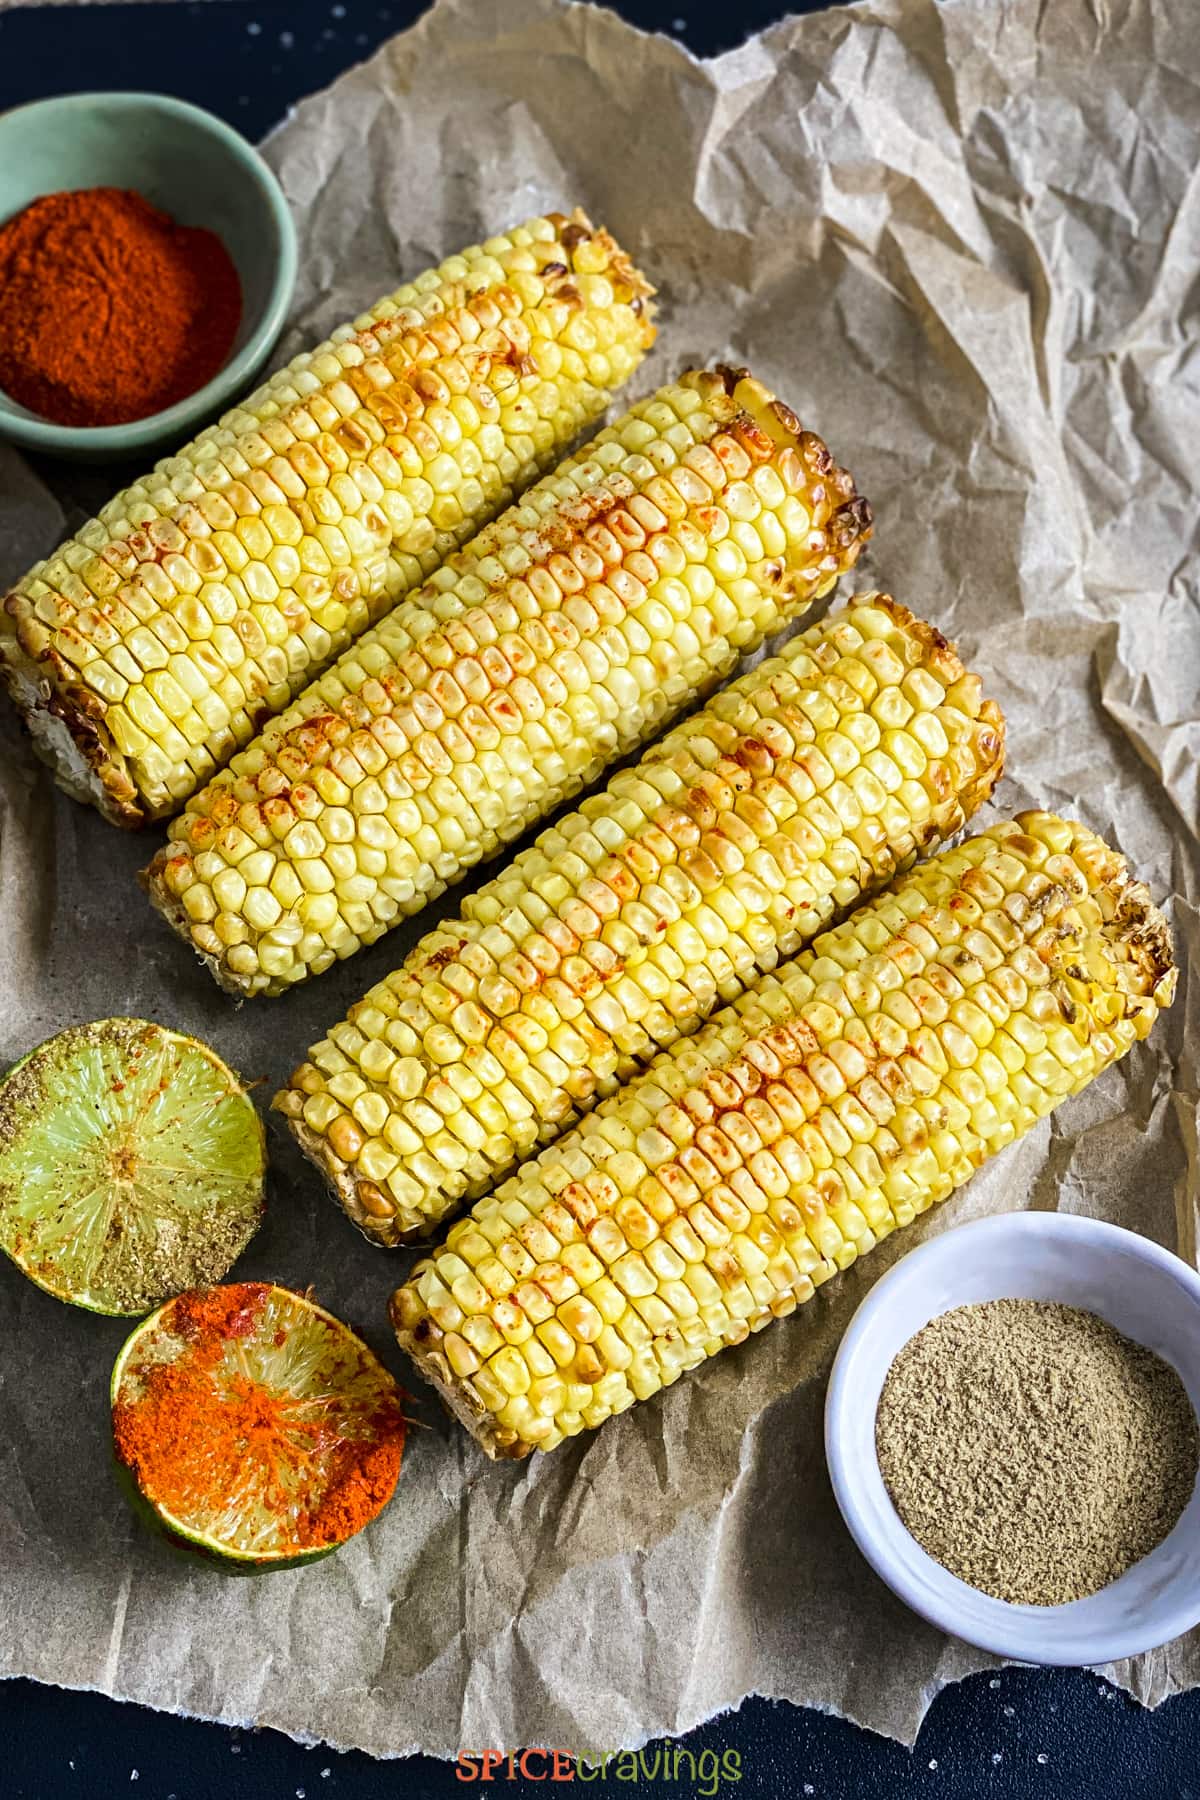 4 ears of roasted corn next to lime halves covered in spices